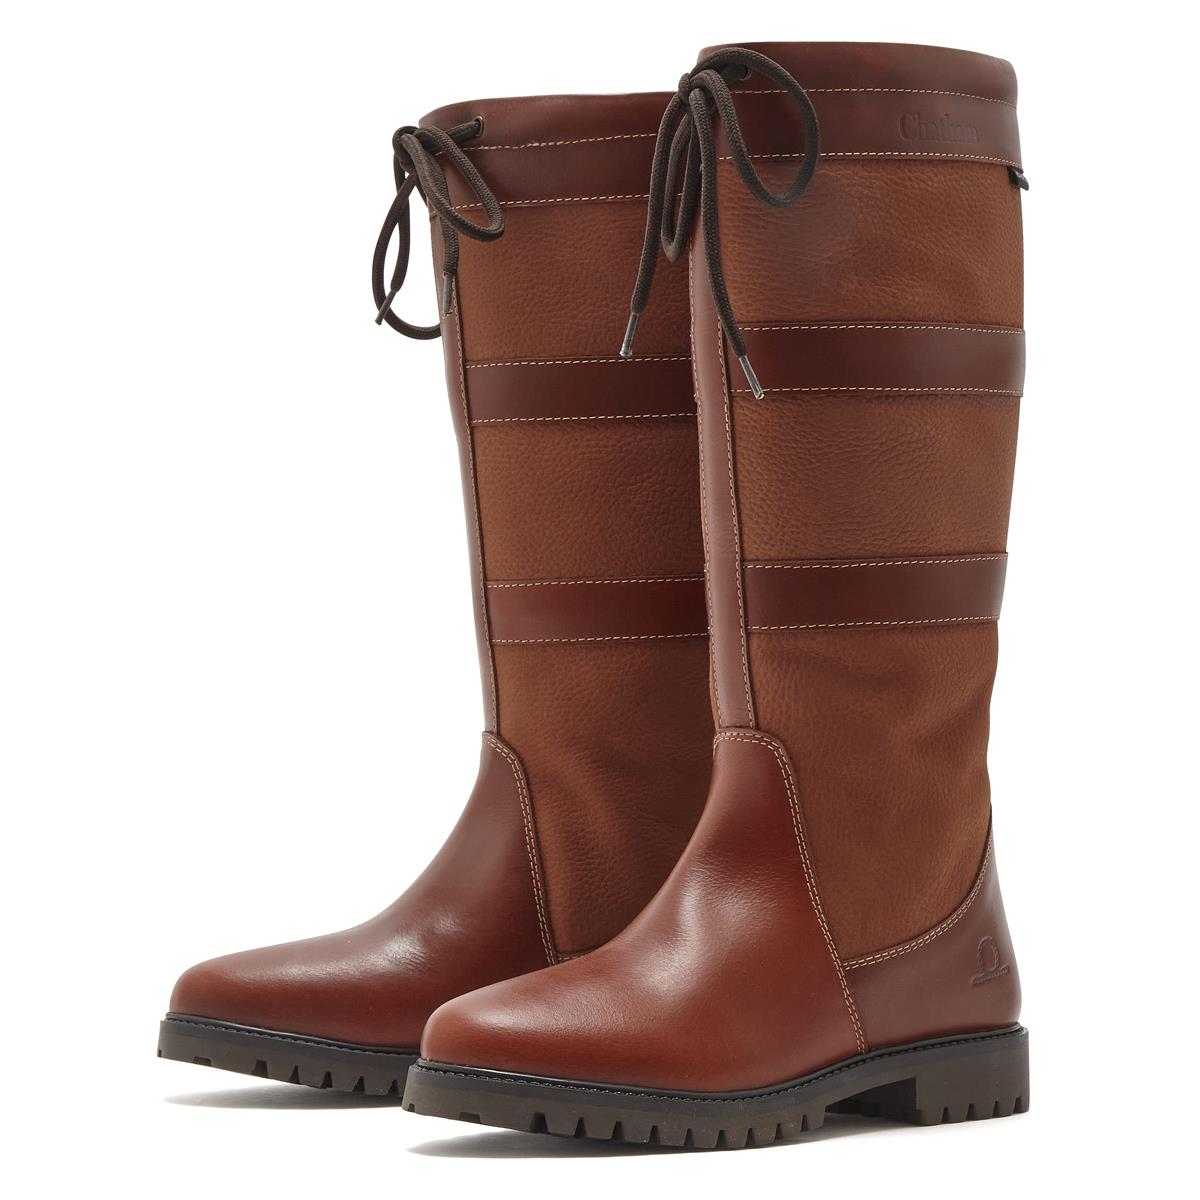 Chatham Womens Kempton Knee Height Boot Questions & Answers